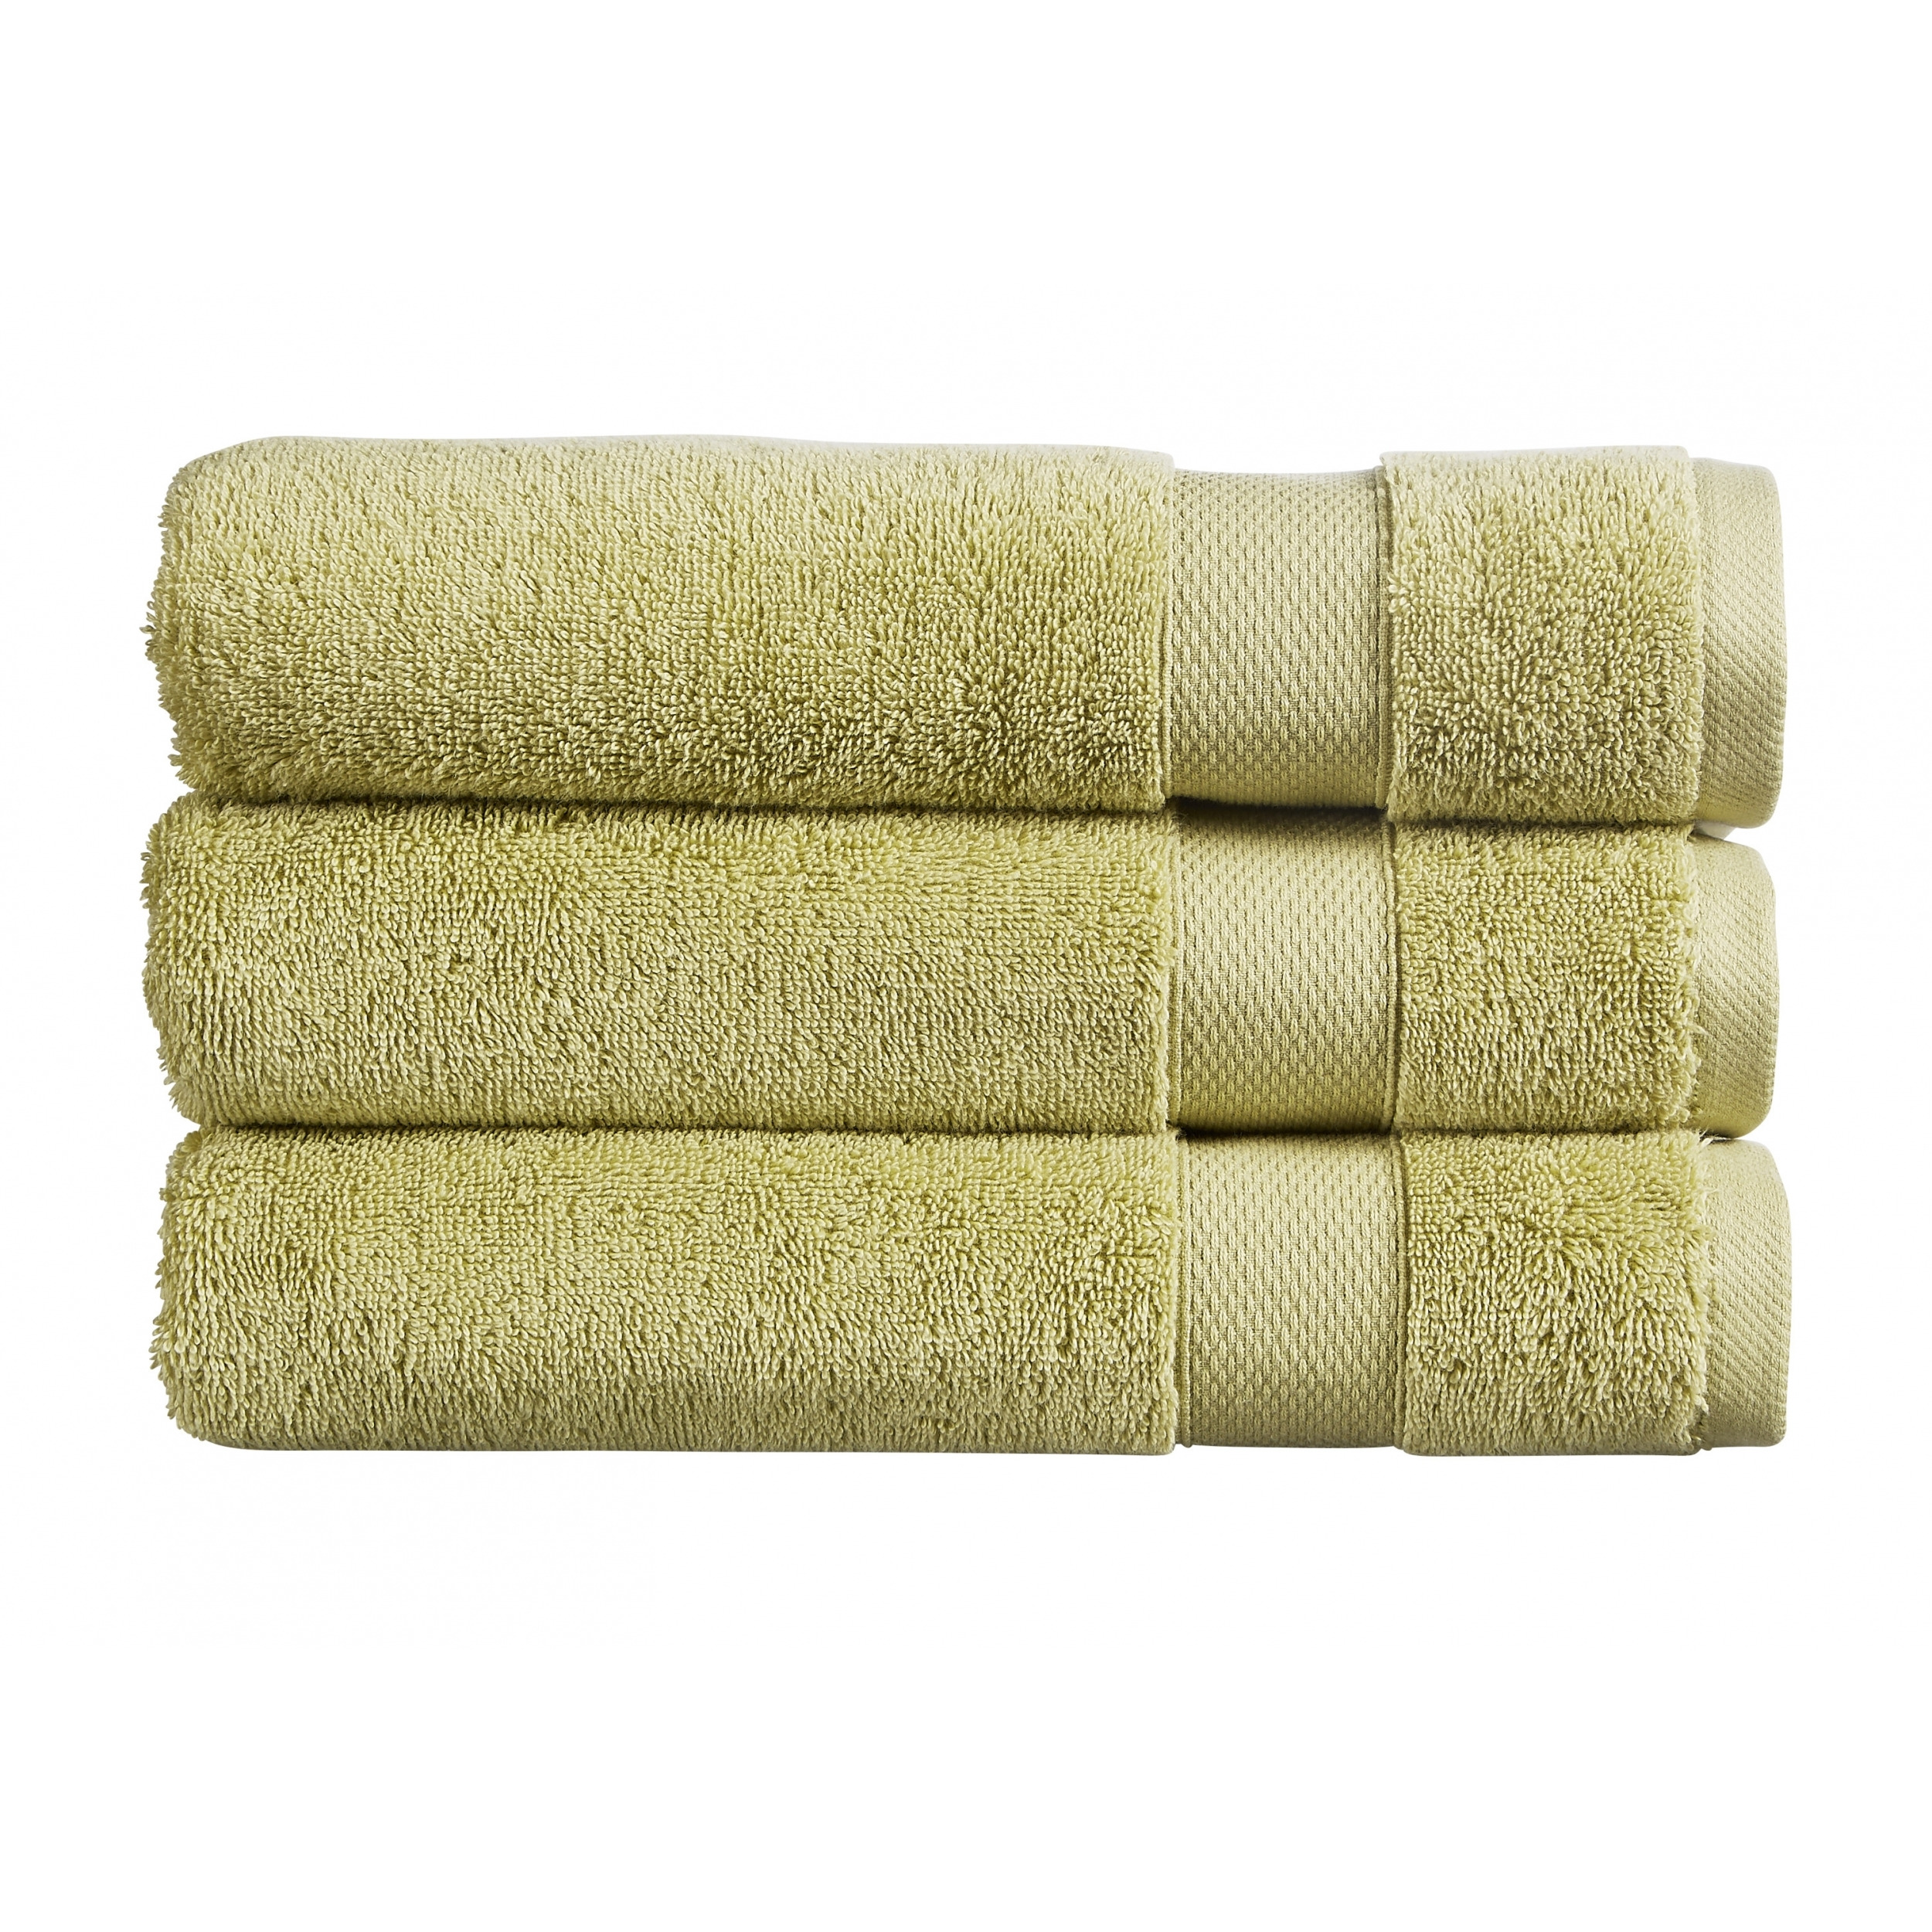 Christy Refresh Bamboo Towels - Sheet, Cotton, Decor